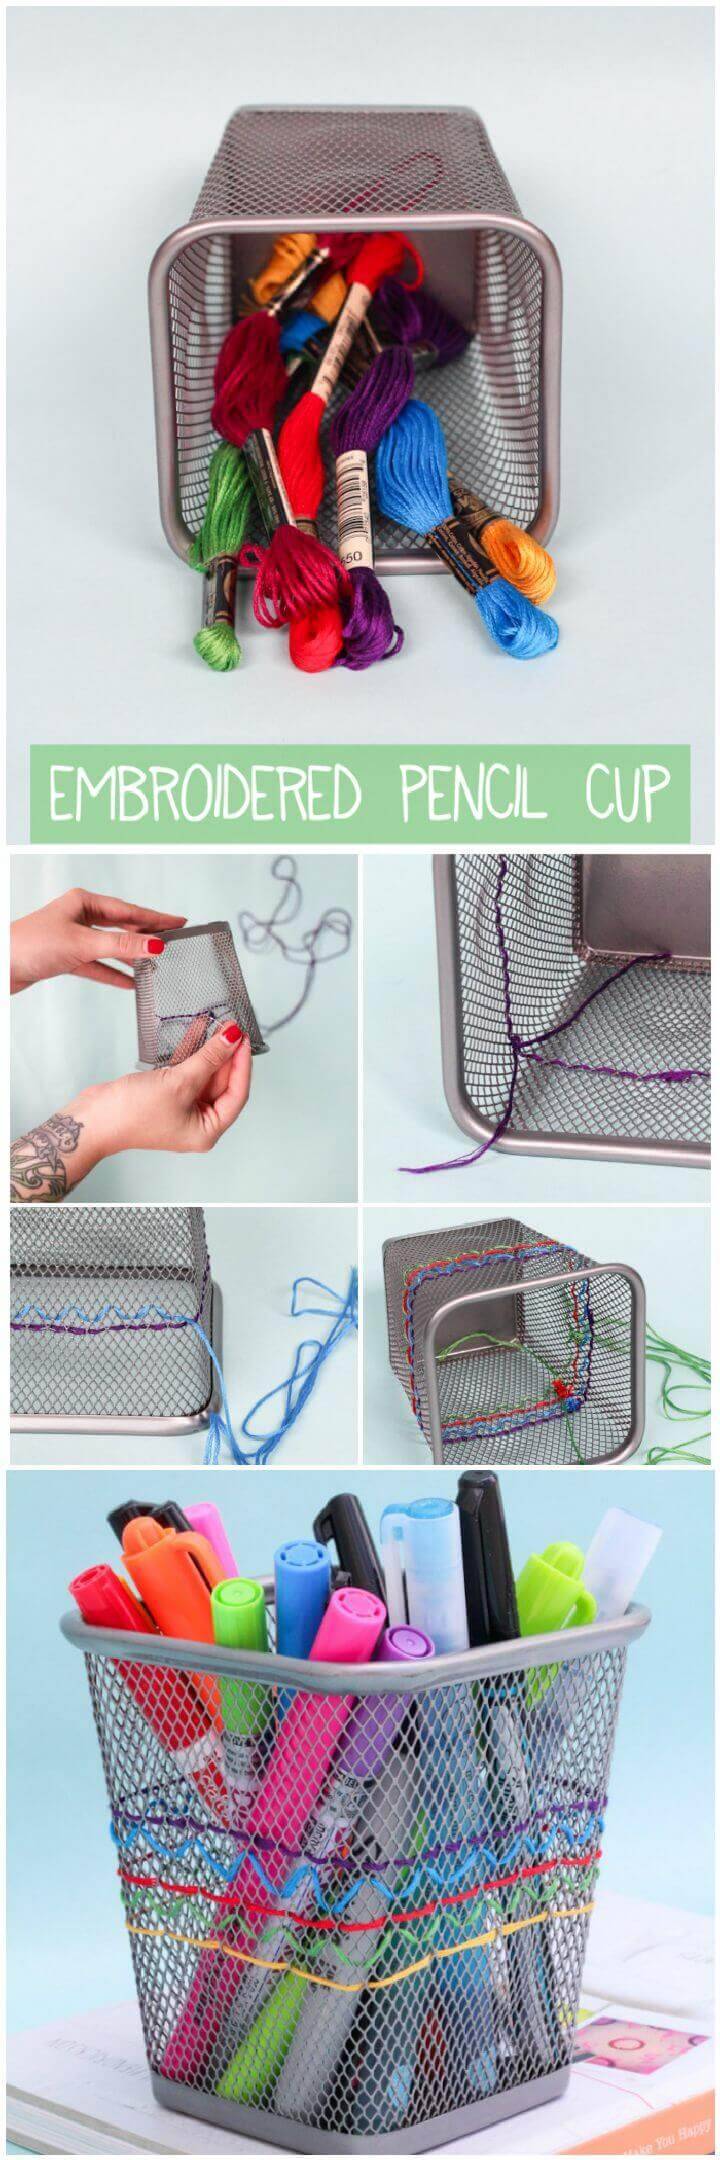 DIY Embroidered Pencil Cup